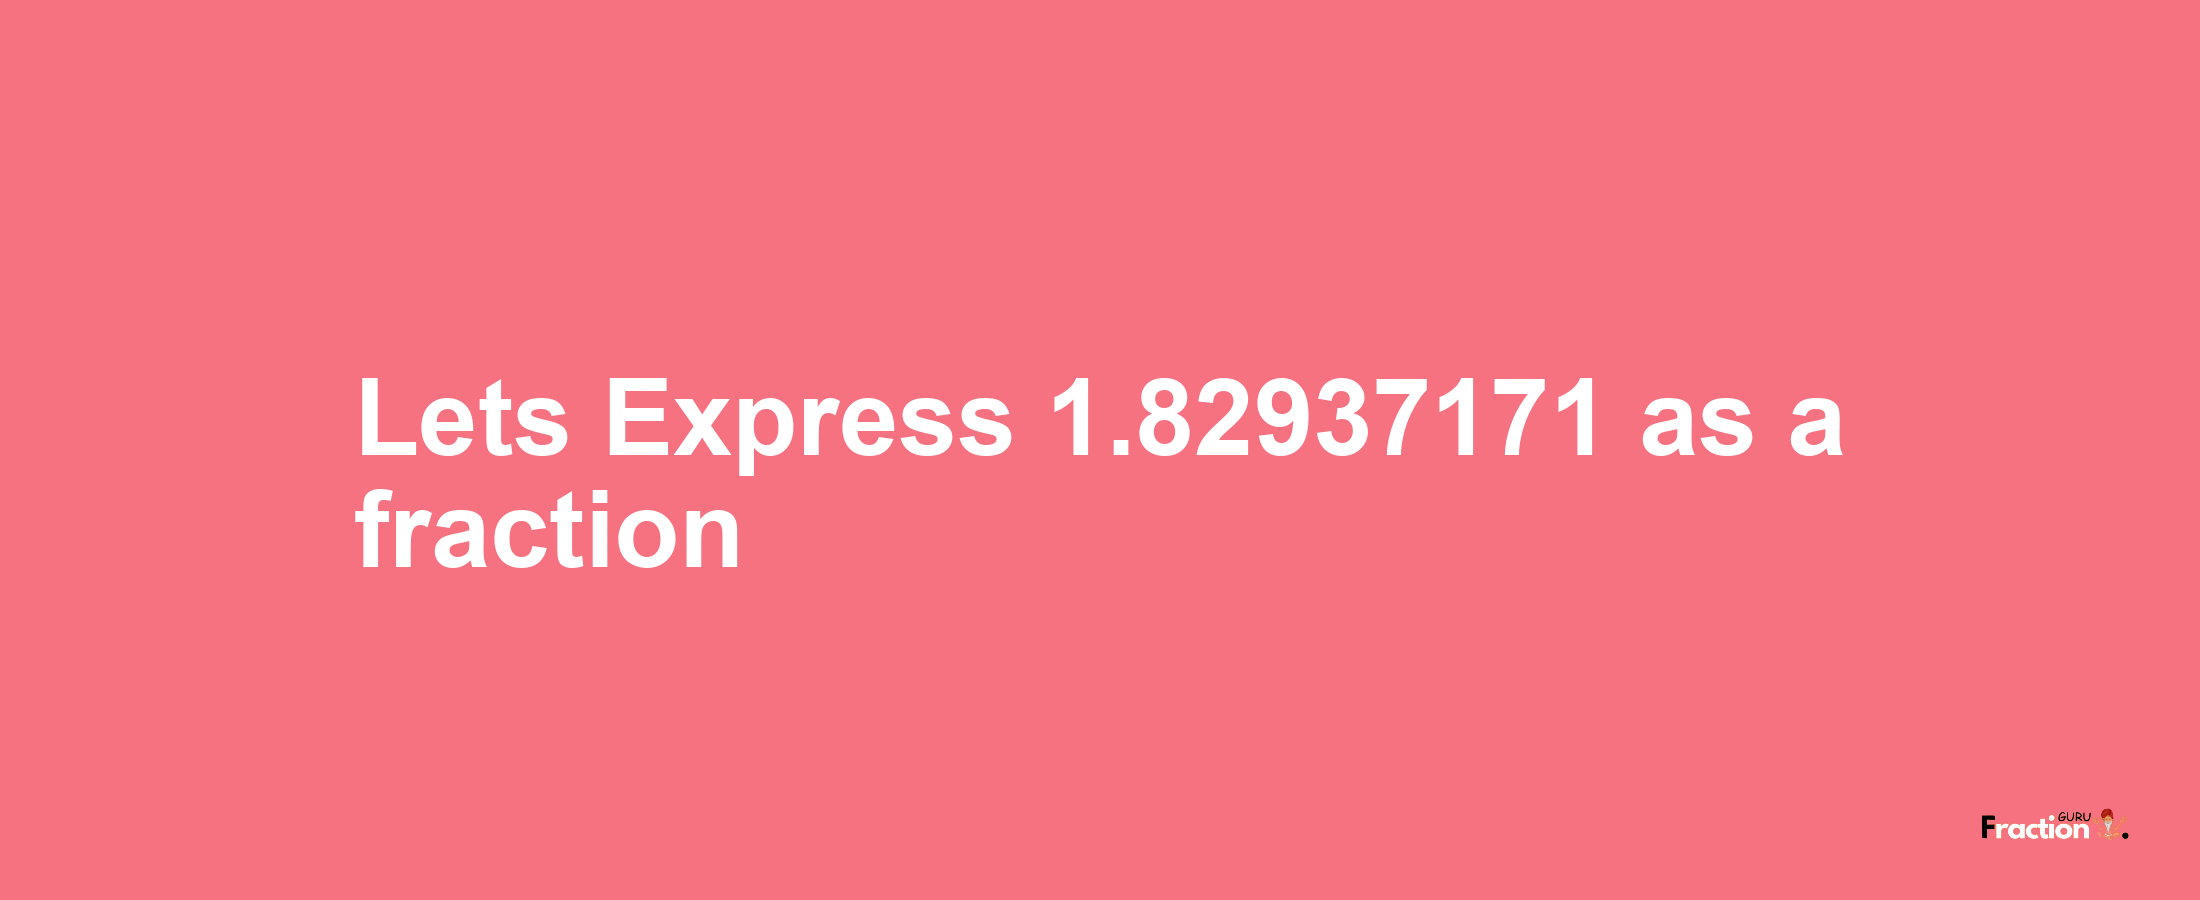 Lets Express 1.82937171 as afraction